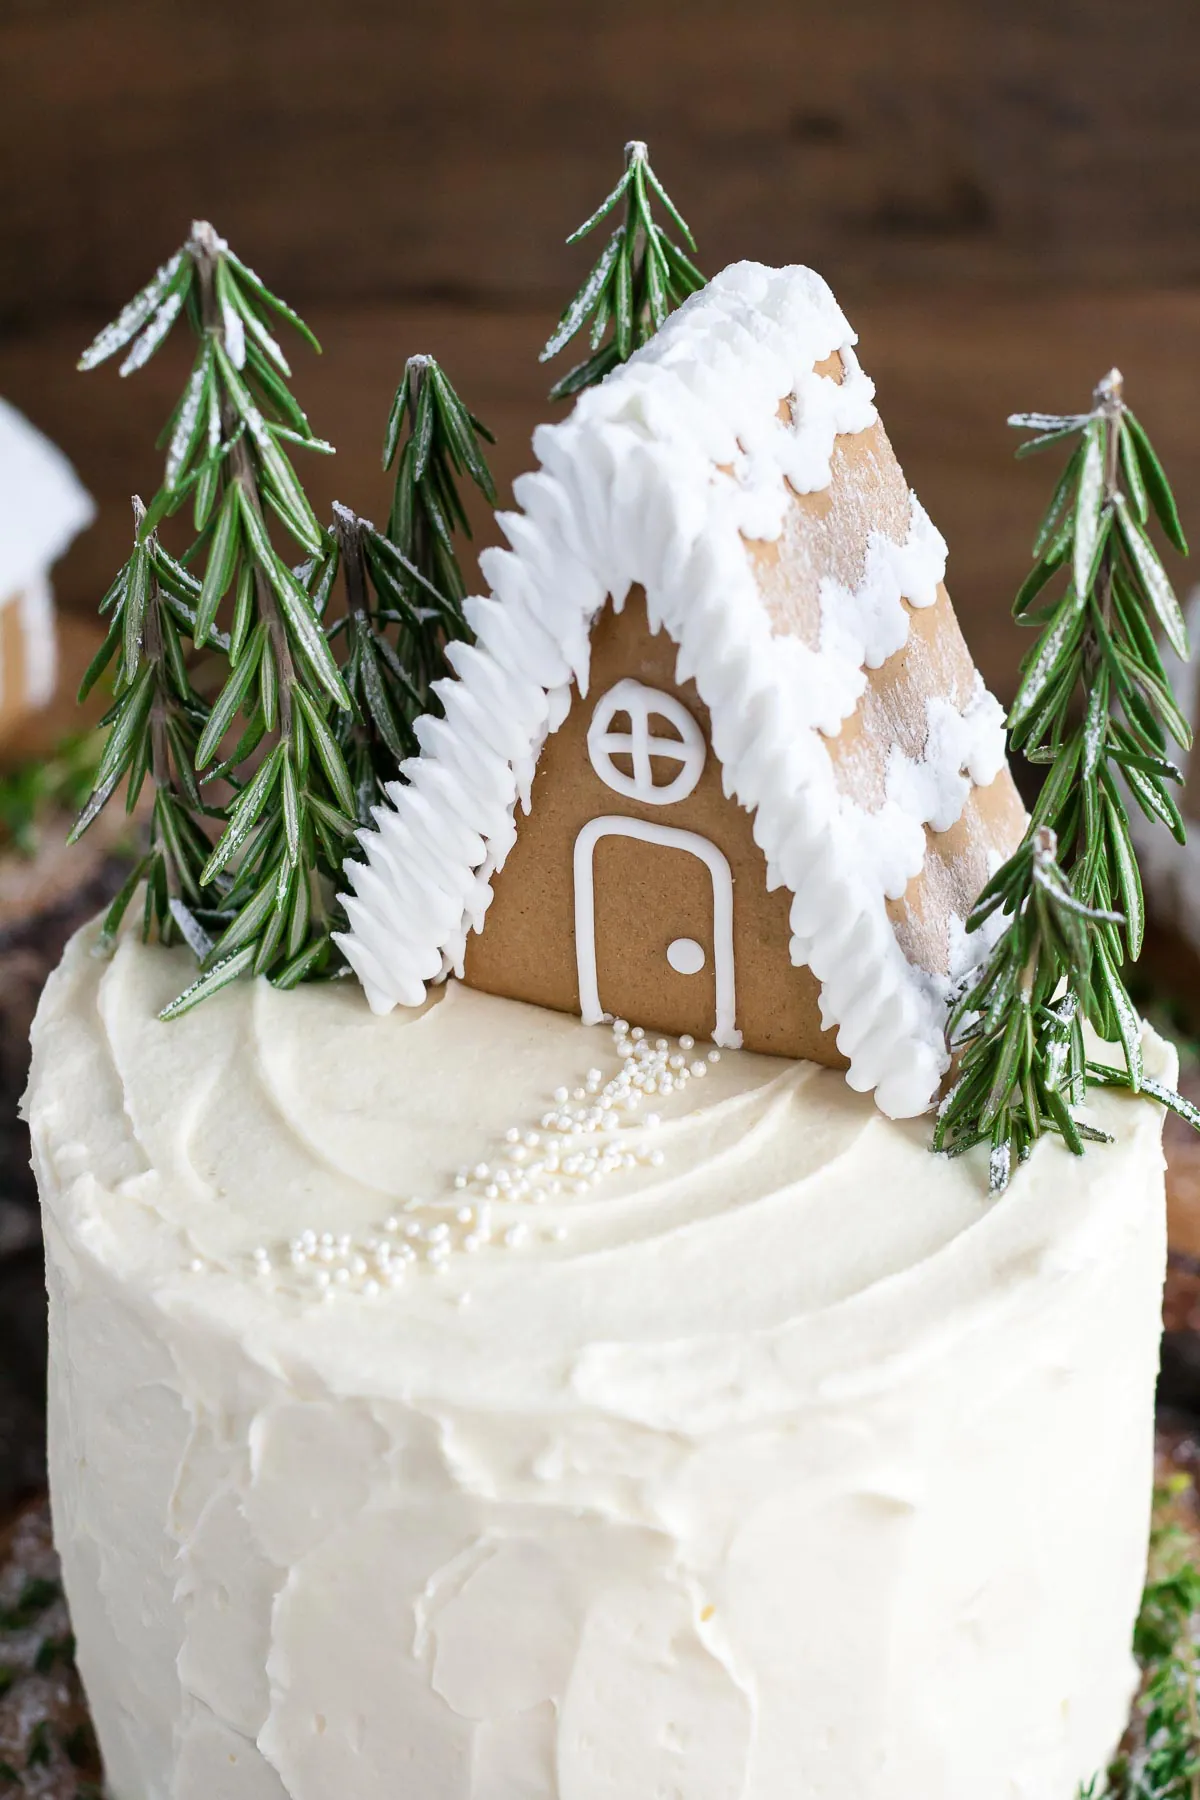 Close up of gingerbread house on top of a cake